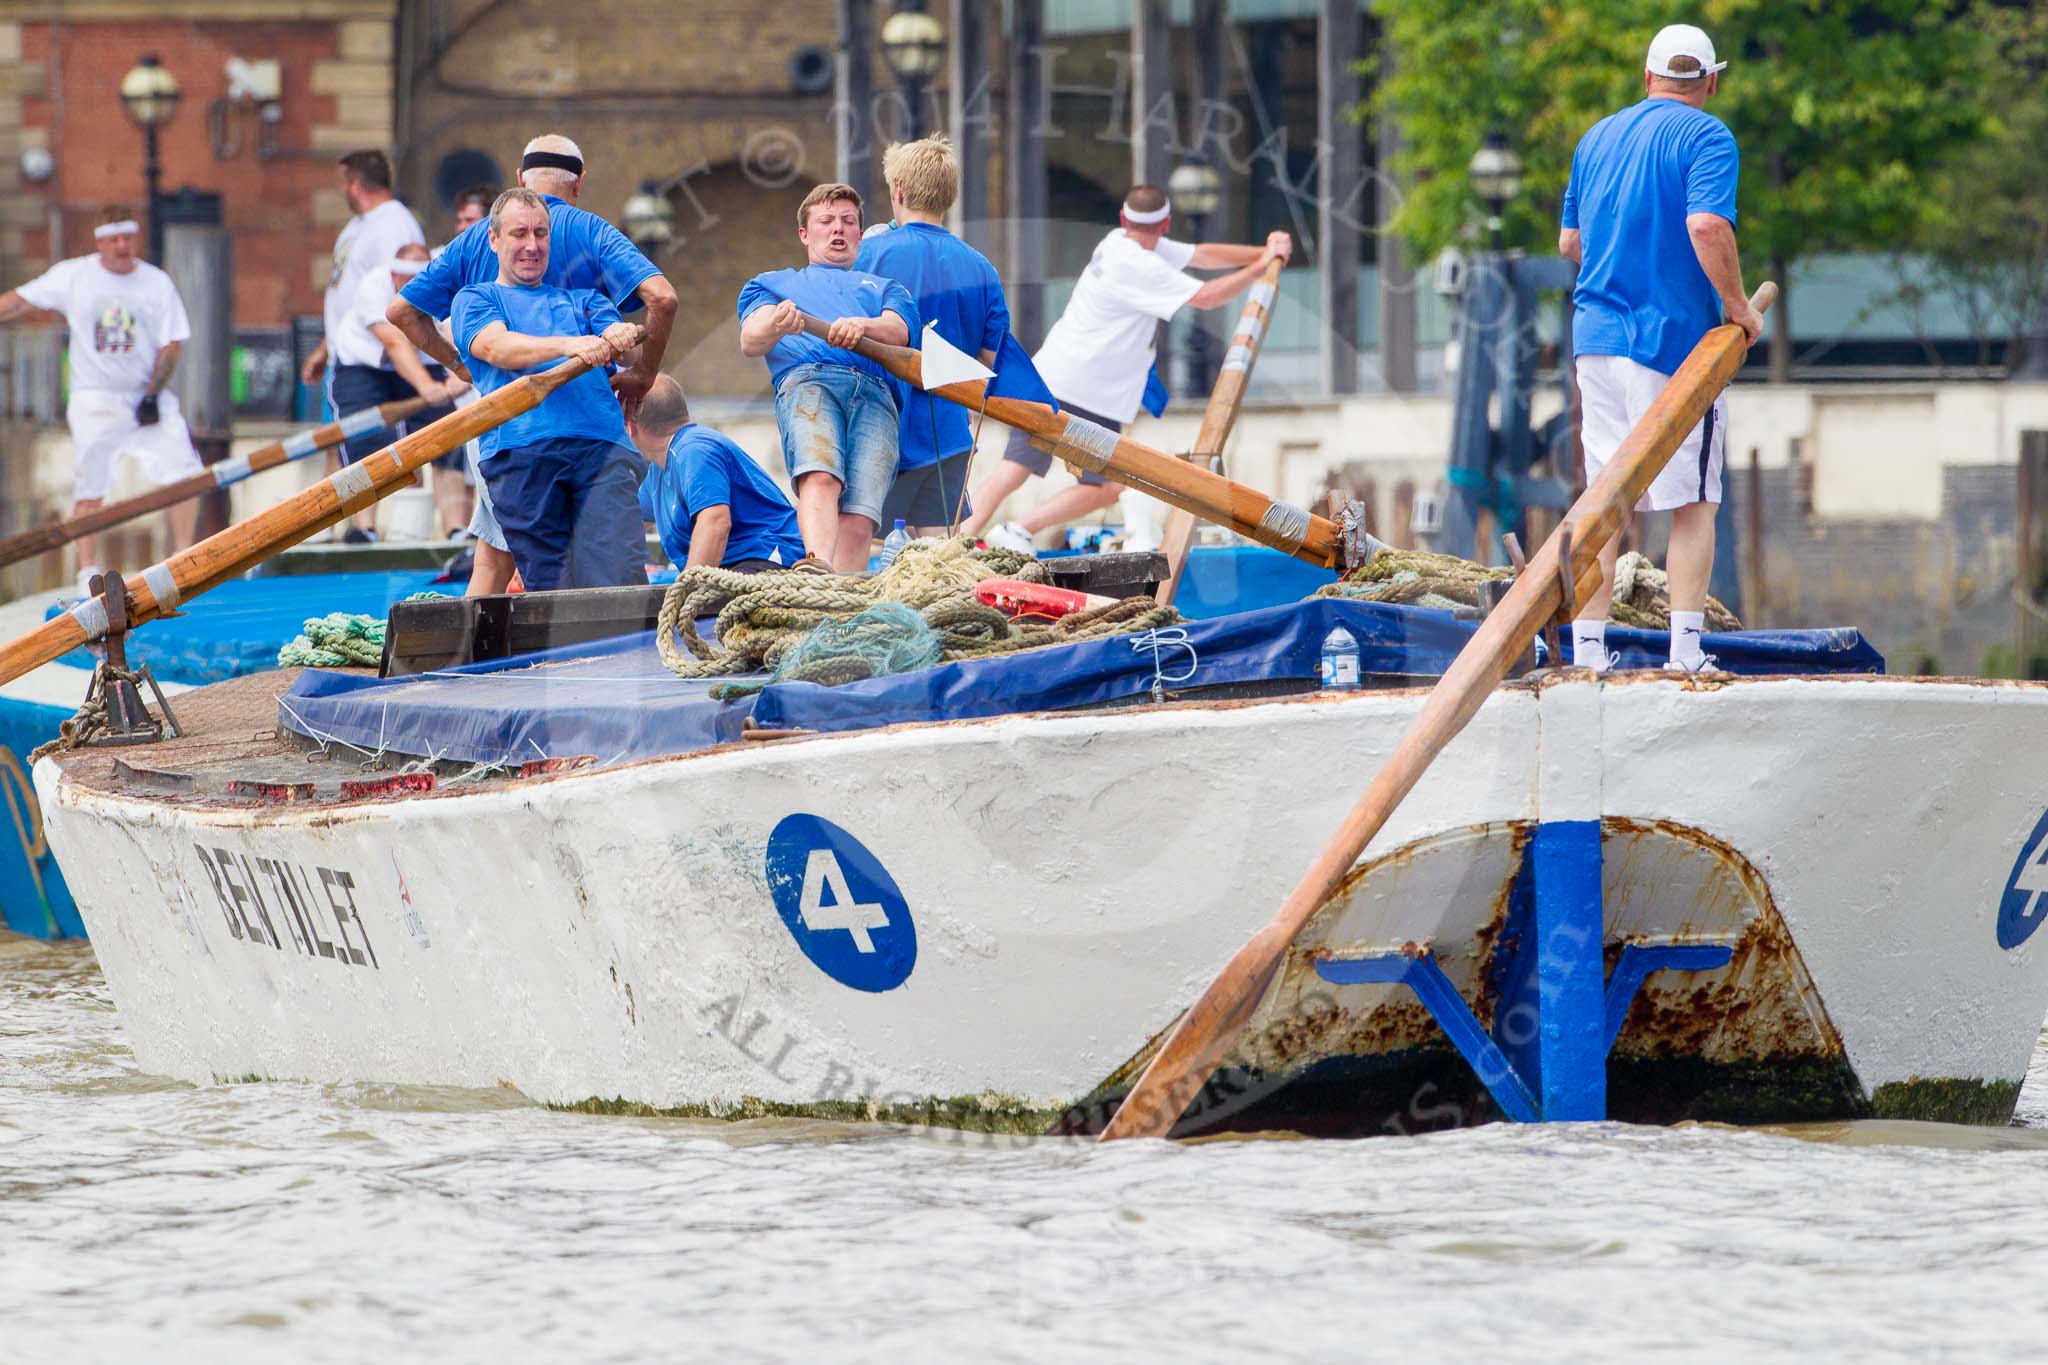 TOW River Thames Barge Driving Race 2014.
River Thames between Greenwich and Westminster,
London,

United Kingdom,
on 28 June 2014 at 13:43, image #271